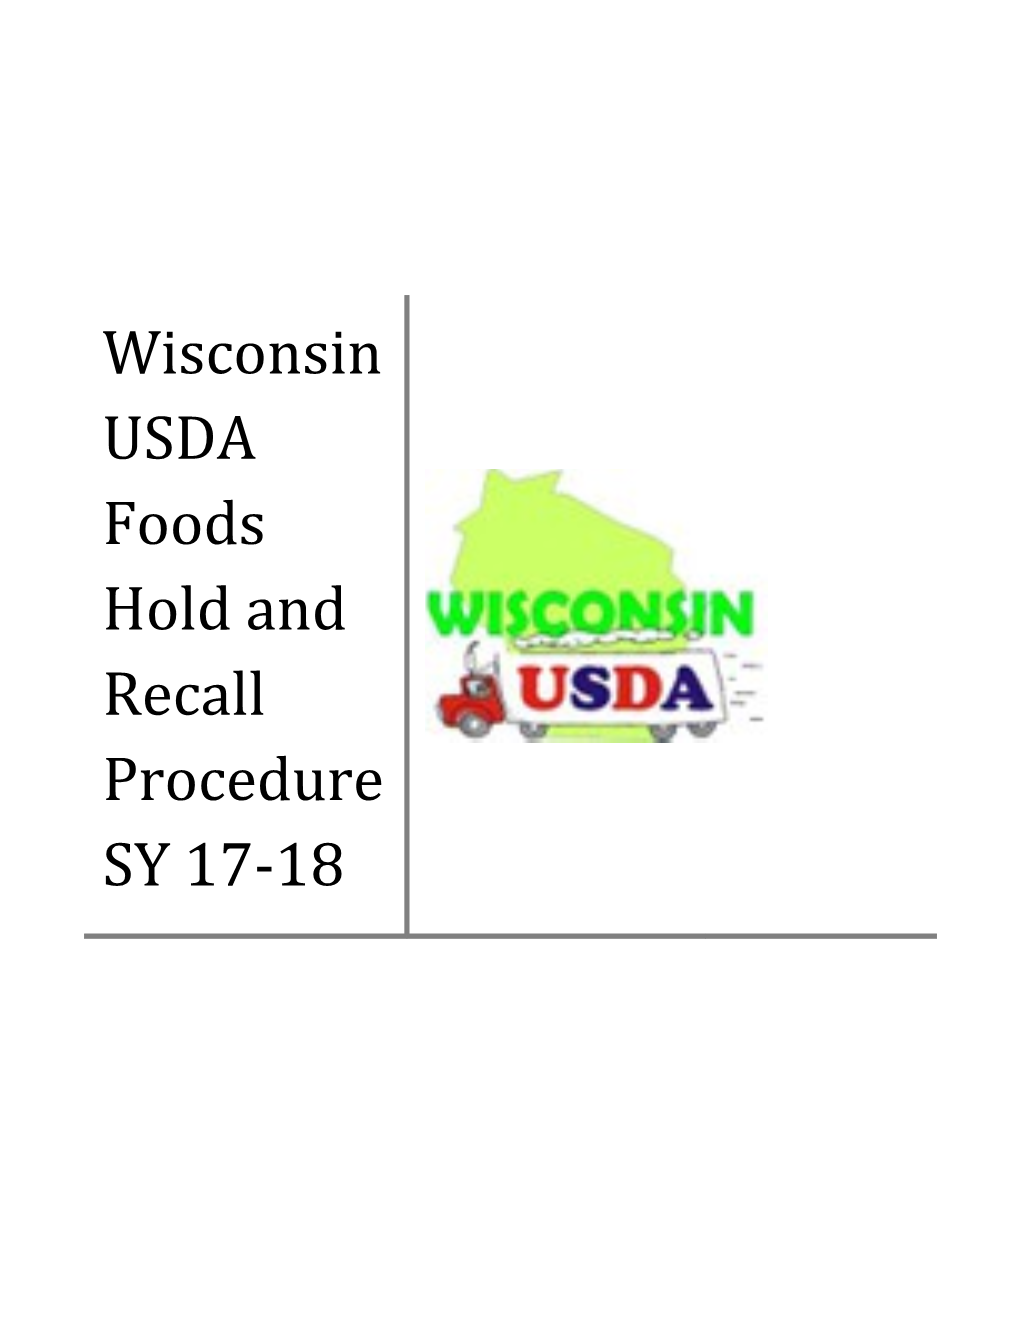 Wisconsin USDA Foods Hold and Recall Procedure SY 17-18